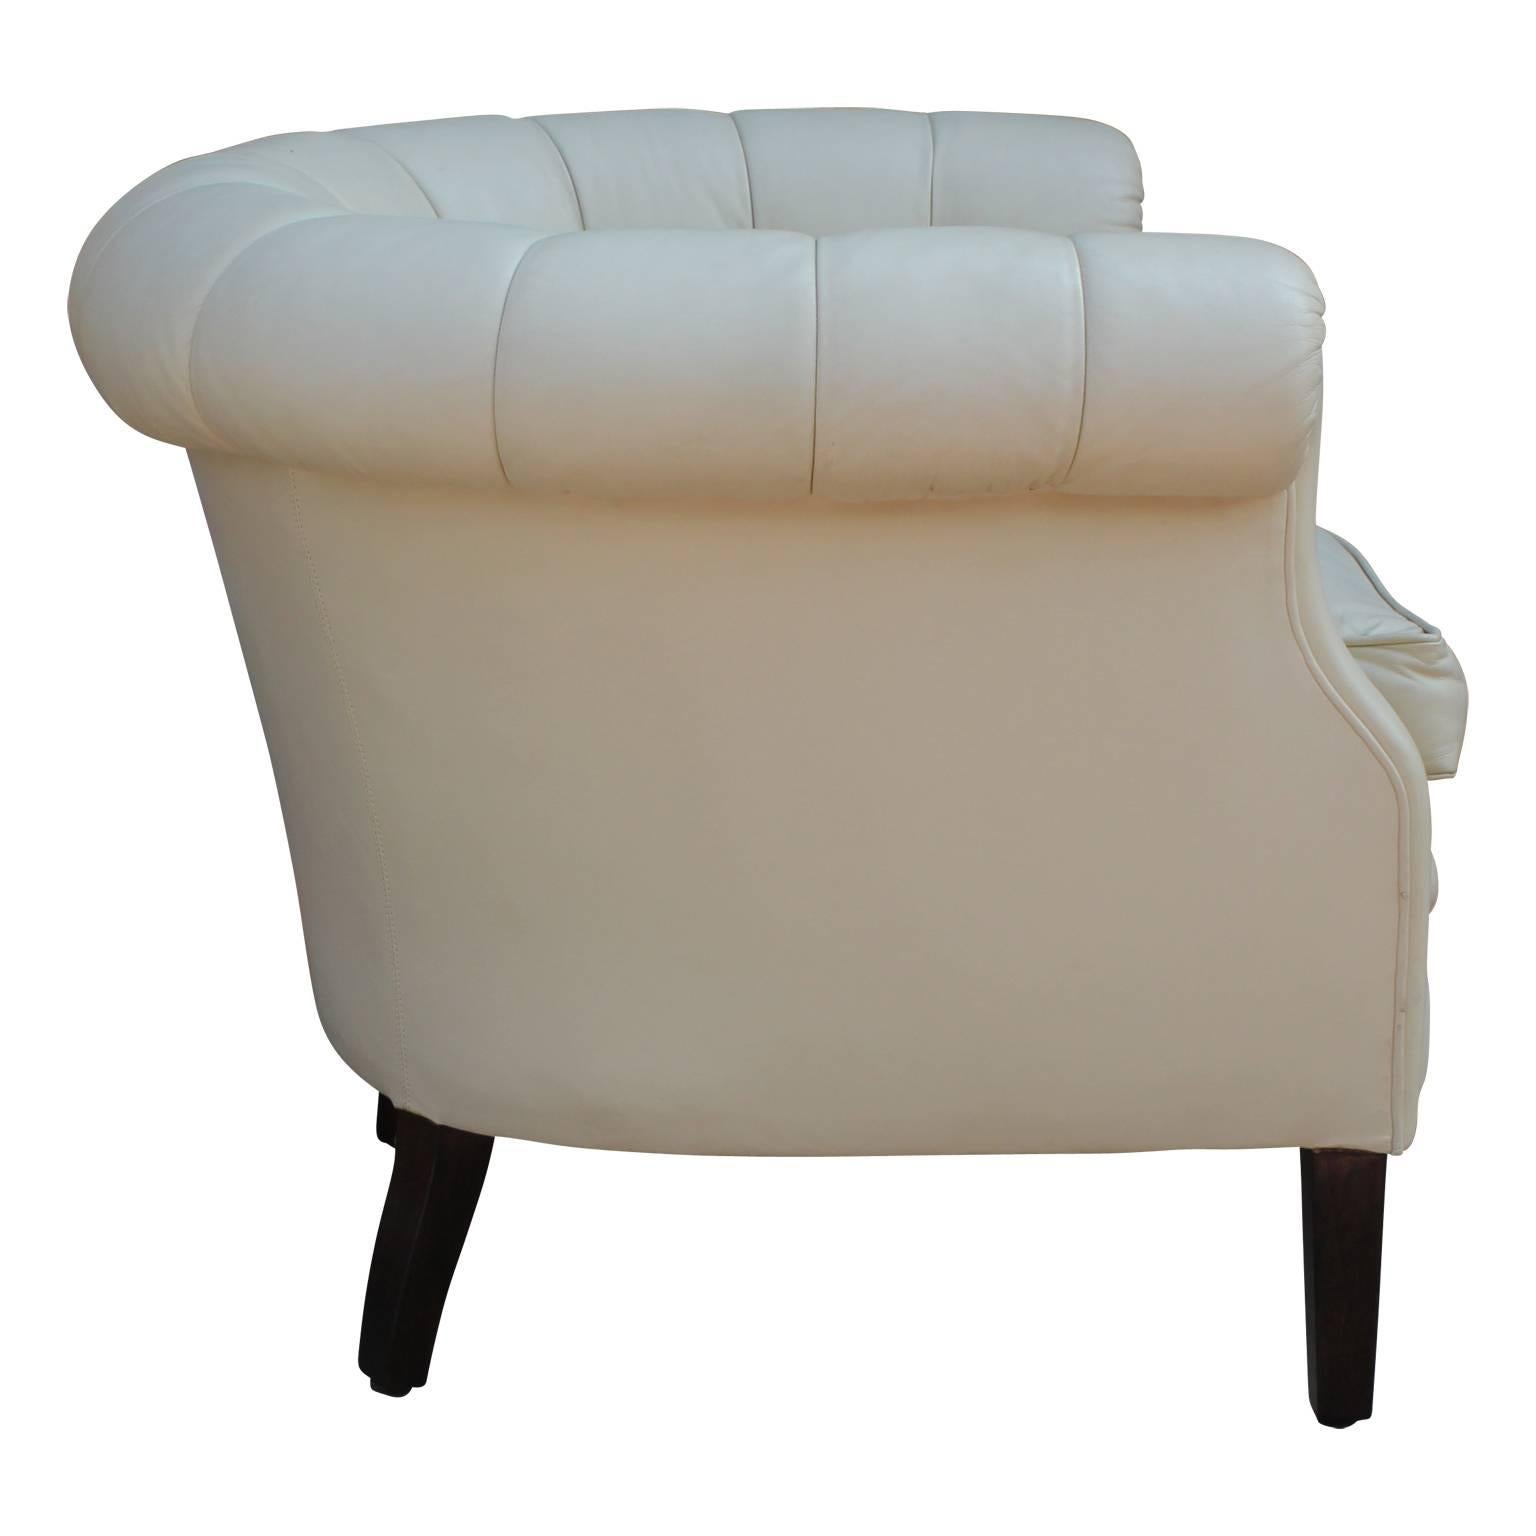 Mid-20th Century Pair of Hollywood Regency White Leather Tufted Chesterfield Style Lounge Chairs